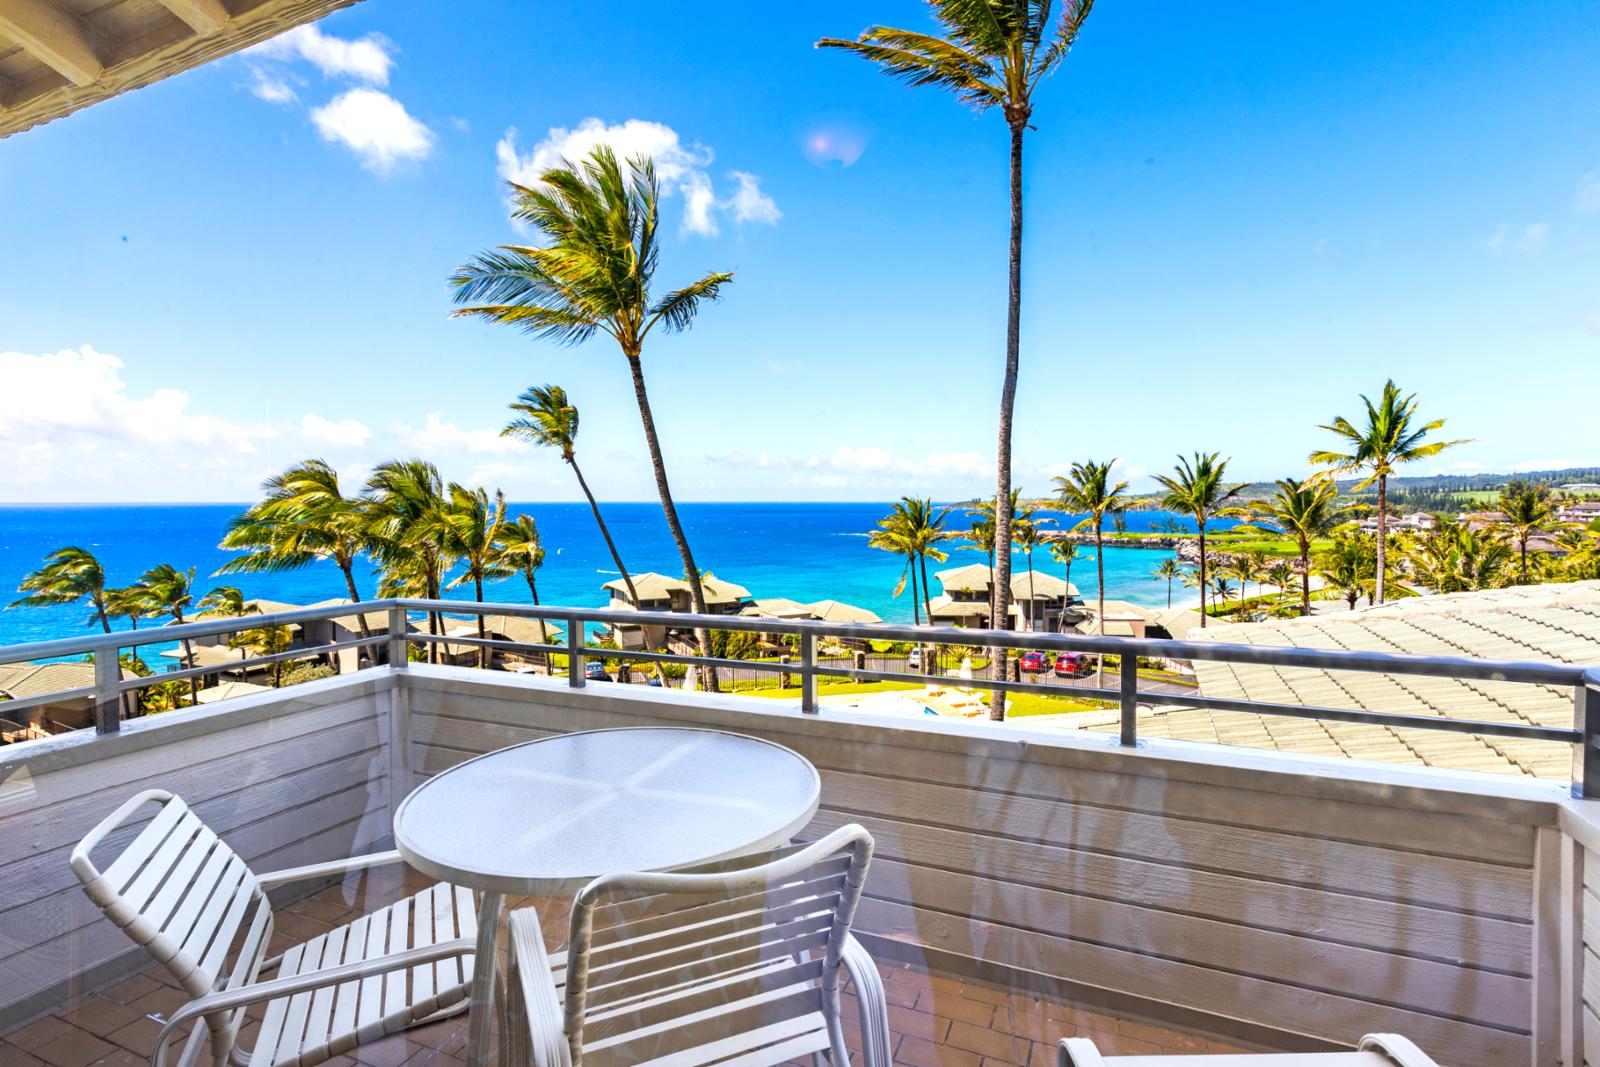 Ocean breezes, perfect setting for the perfect vacation!